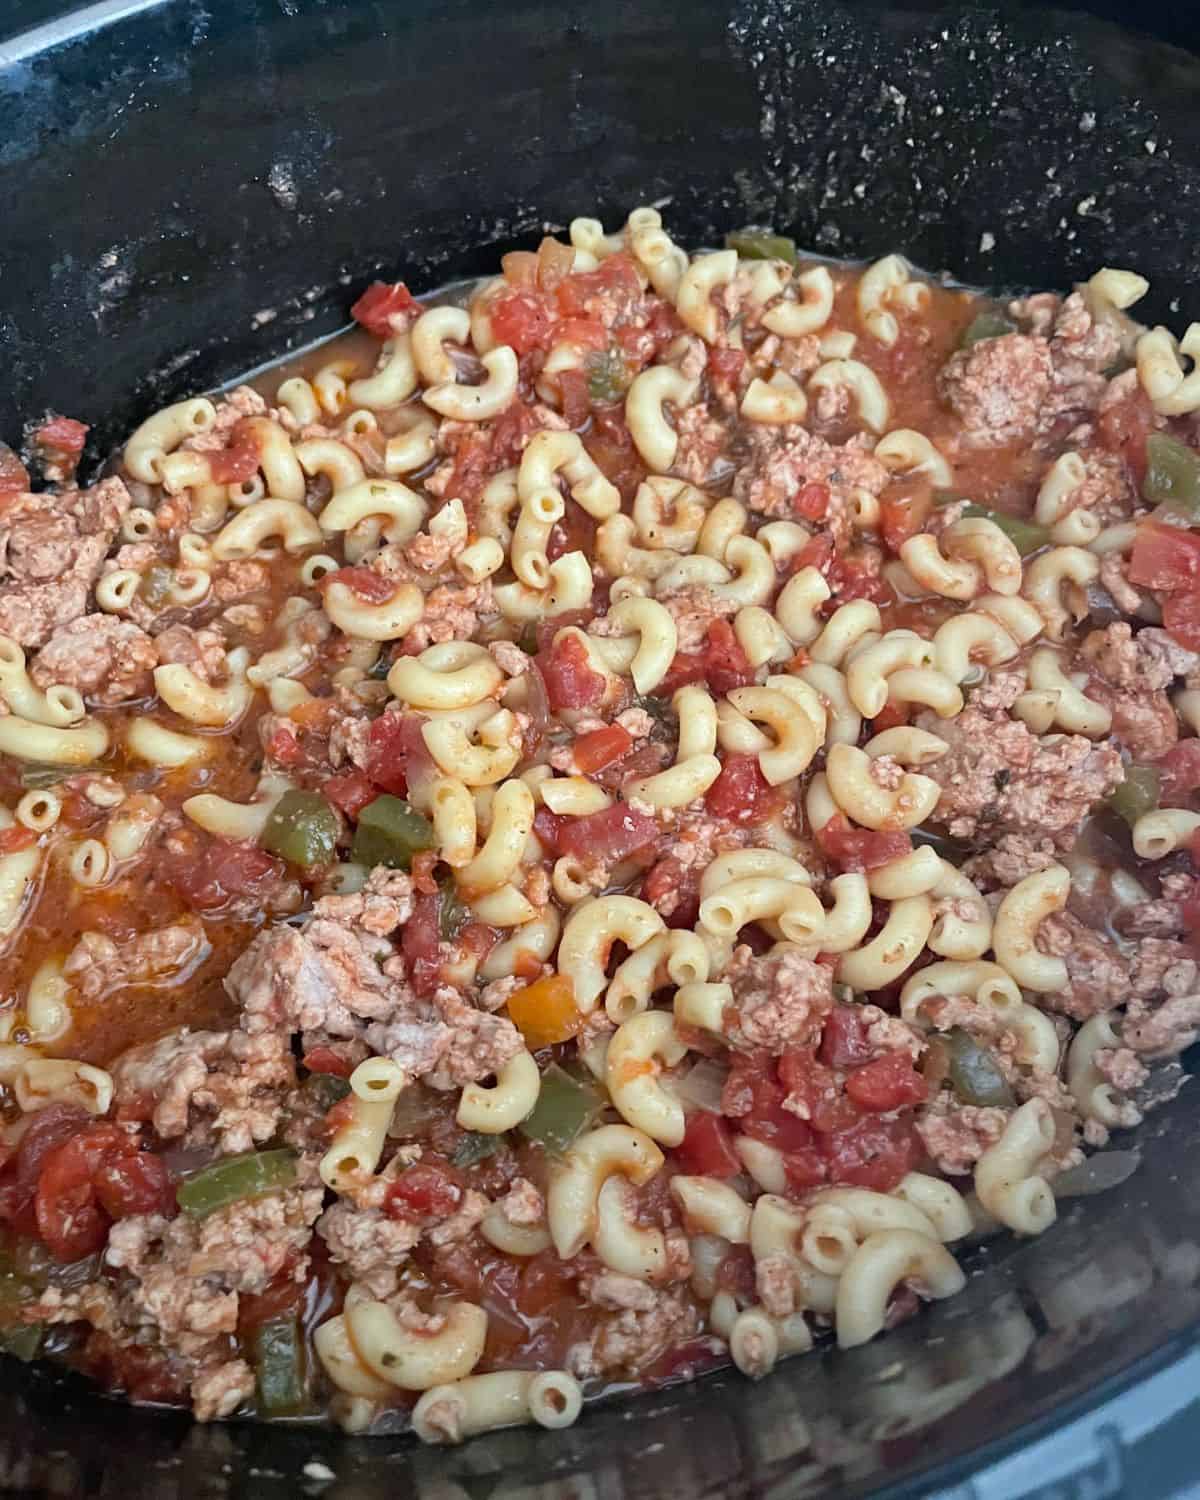 Goulash mixed in crock pot with cooked macaroni noodles.